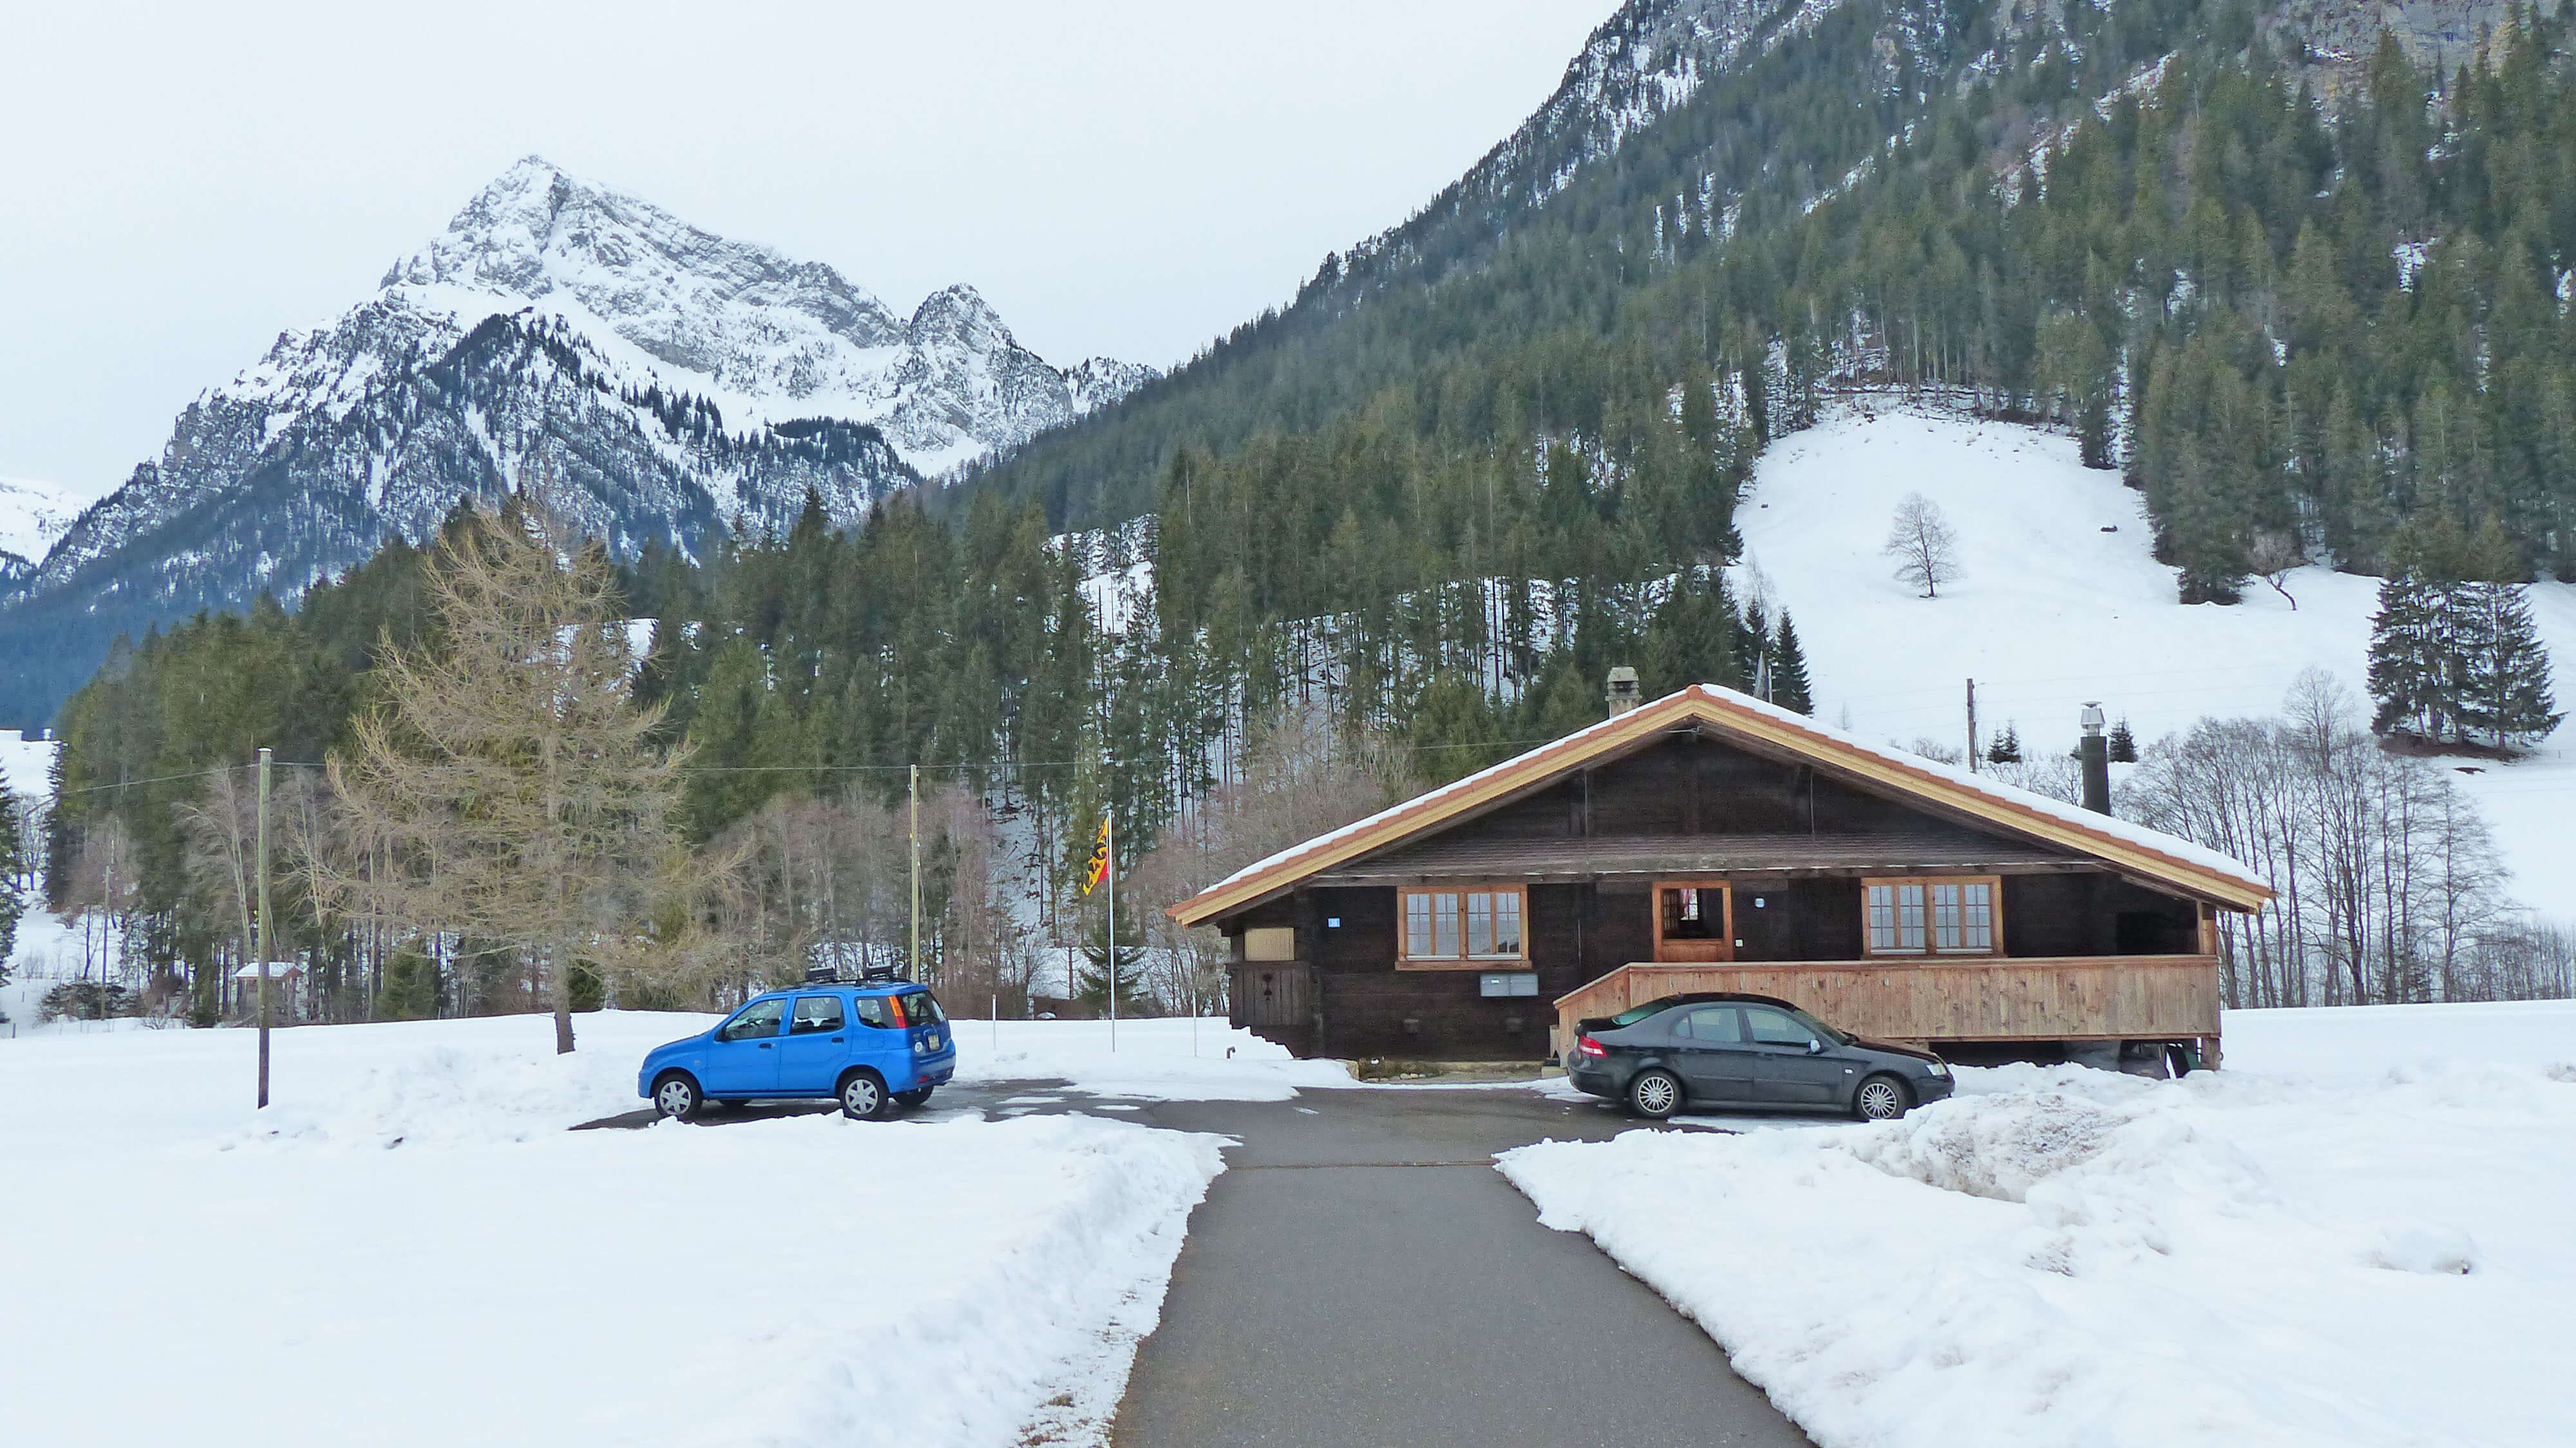 Access road to the chalet 